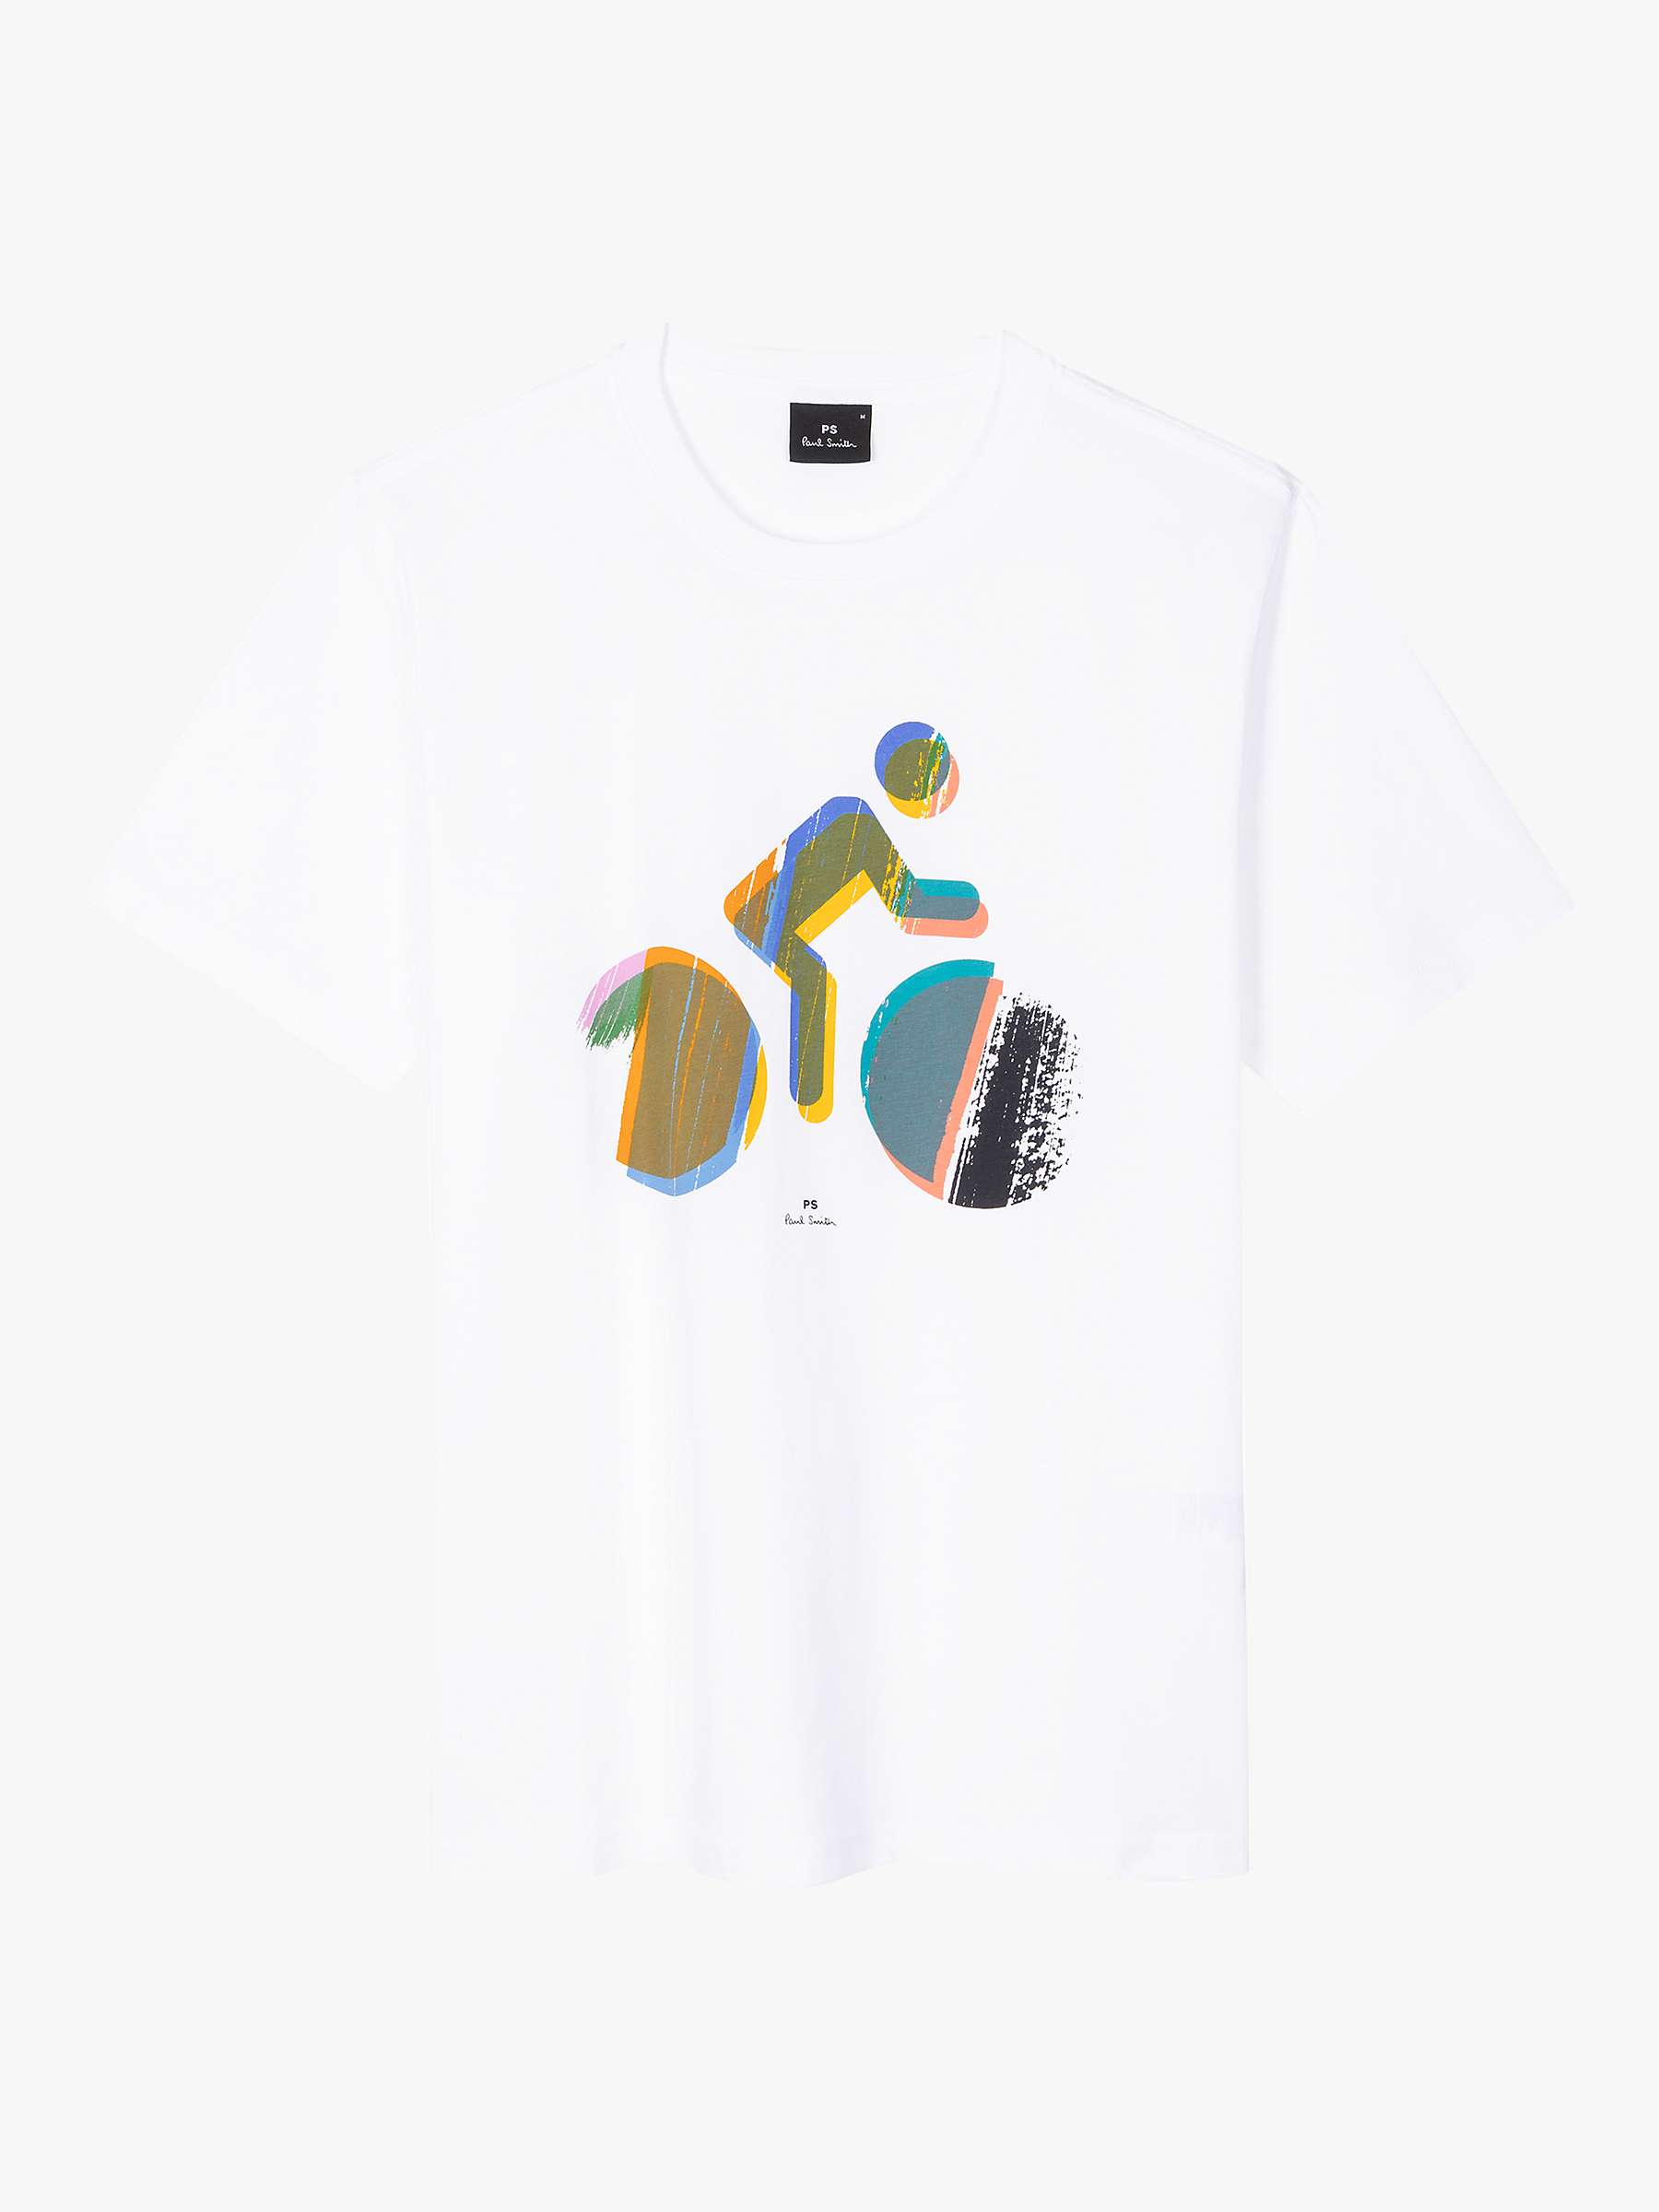 Buy PS Paul Smith Regular Cycle T-Shirt, White/Multi Online at johnlewis.com